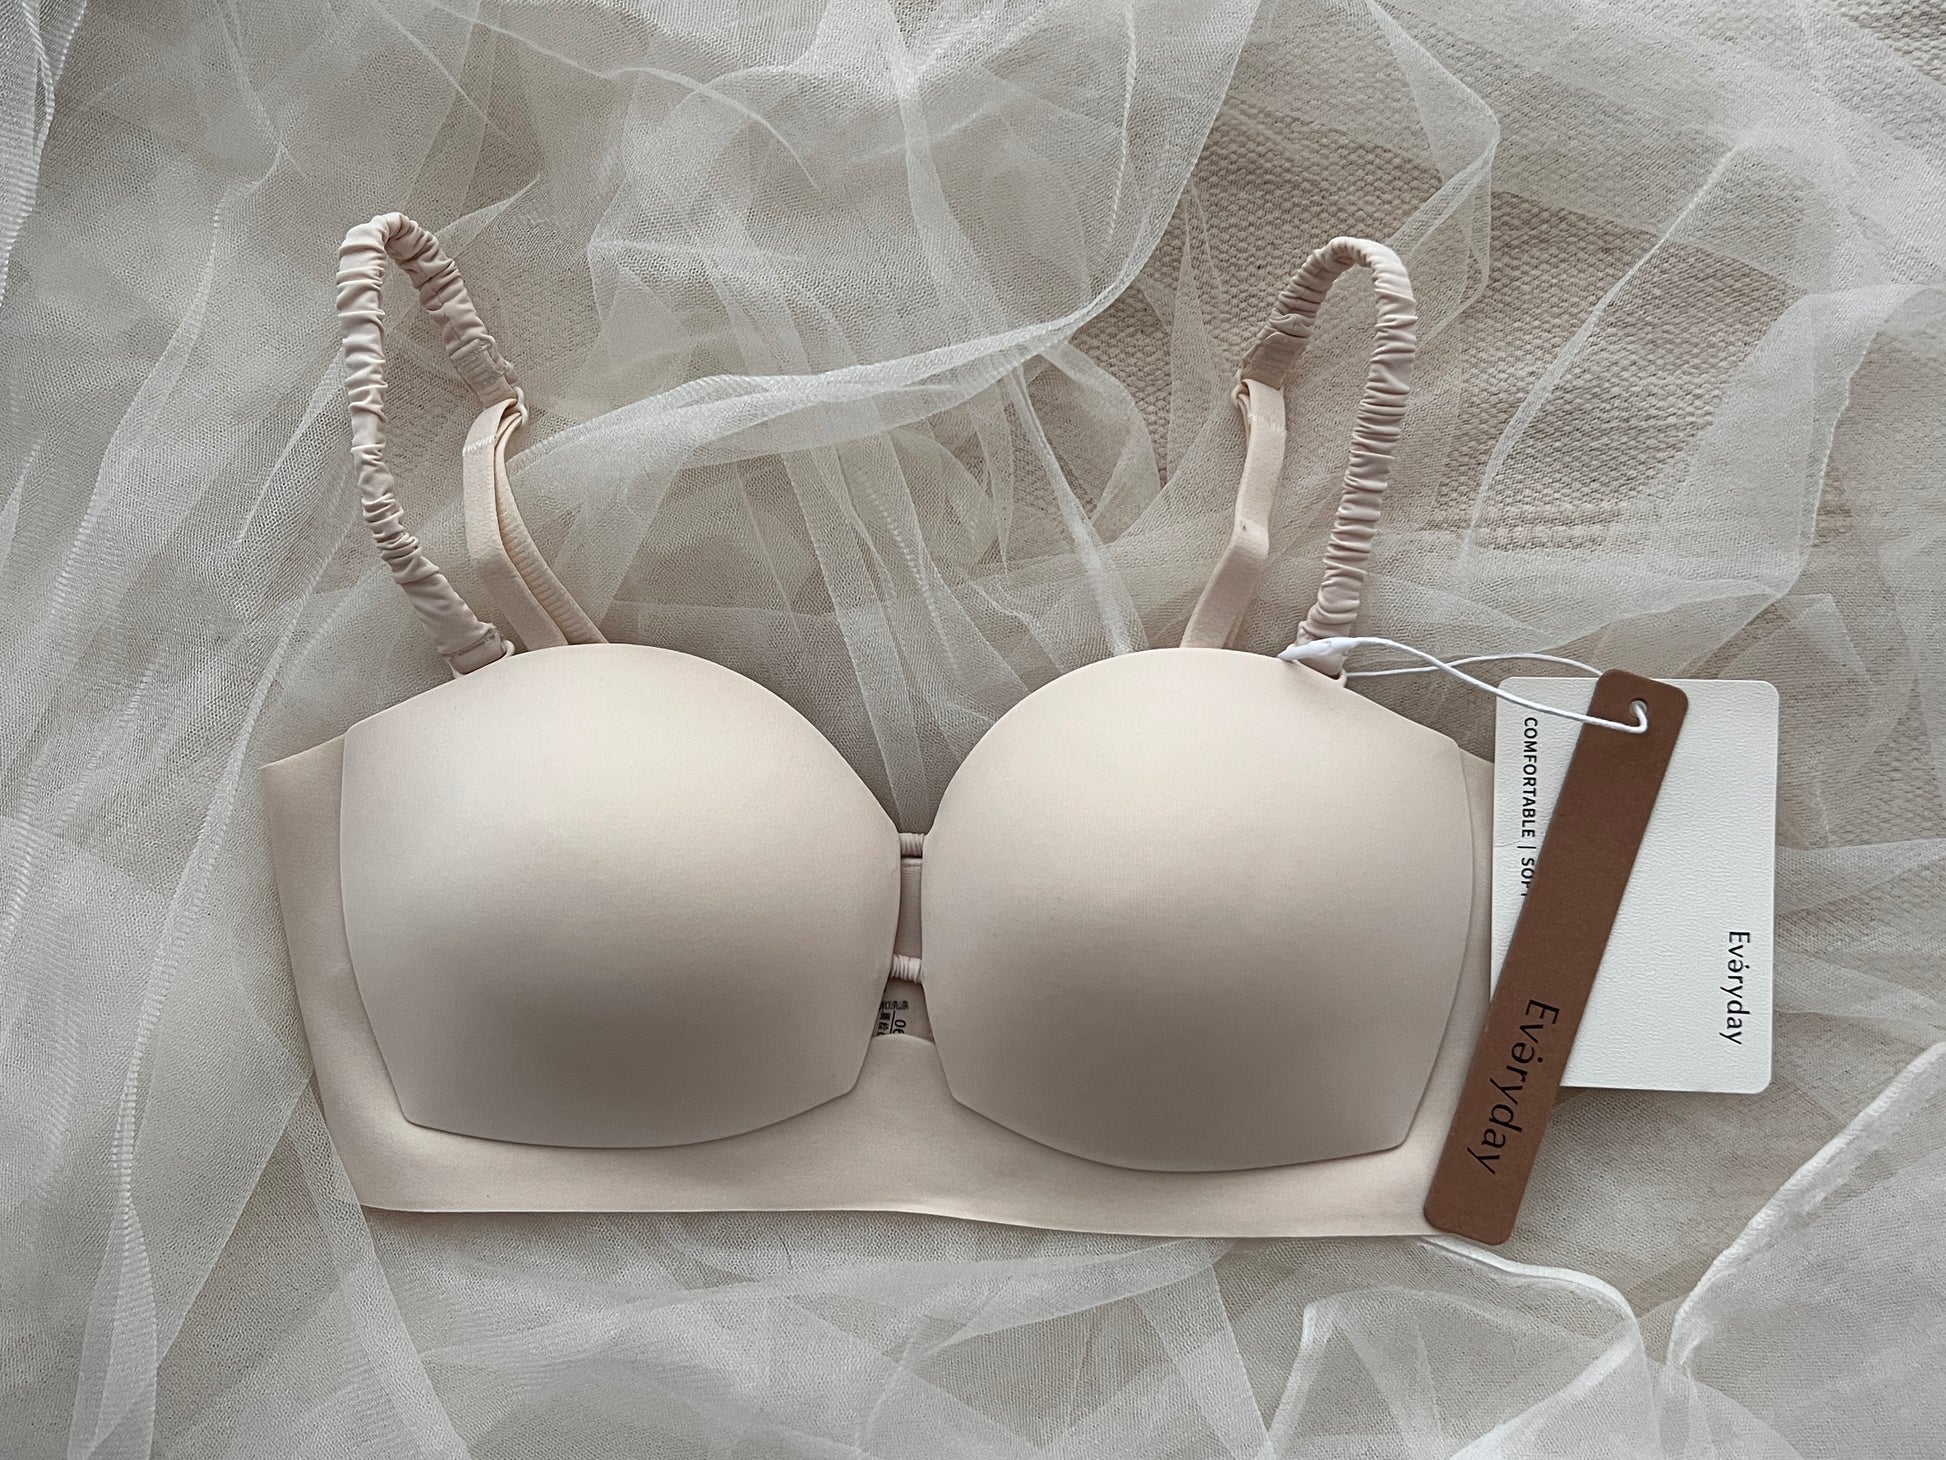 Smart and Sexy Smooth Multiway Add-1-Size Bra (SA901) 34A/White at   Women's Clothing store